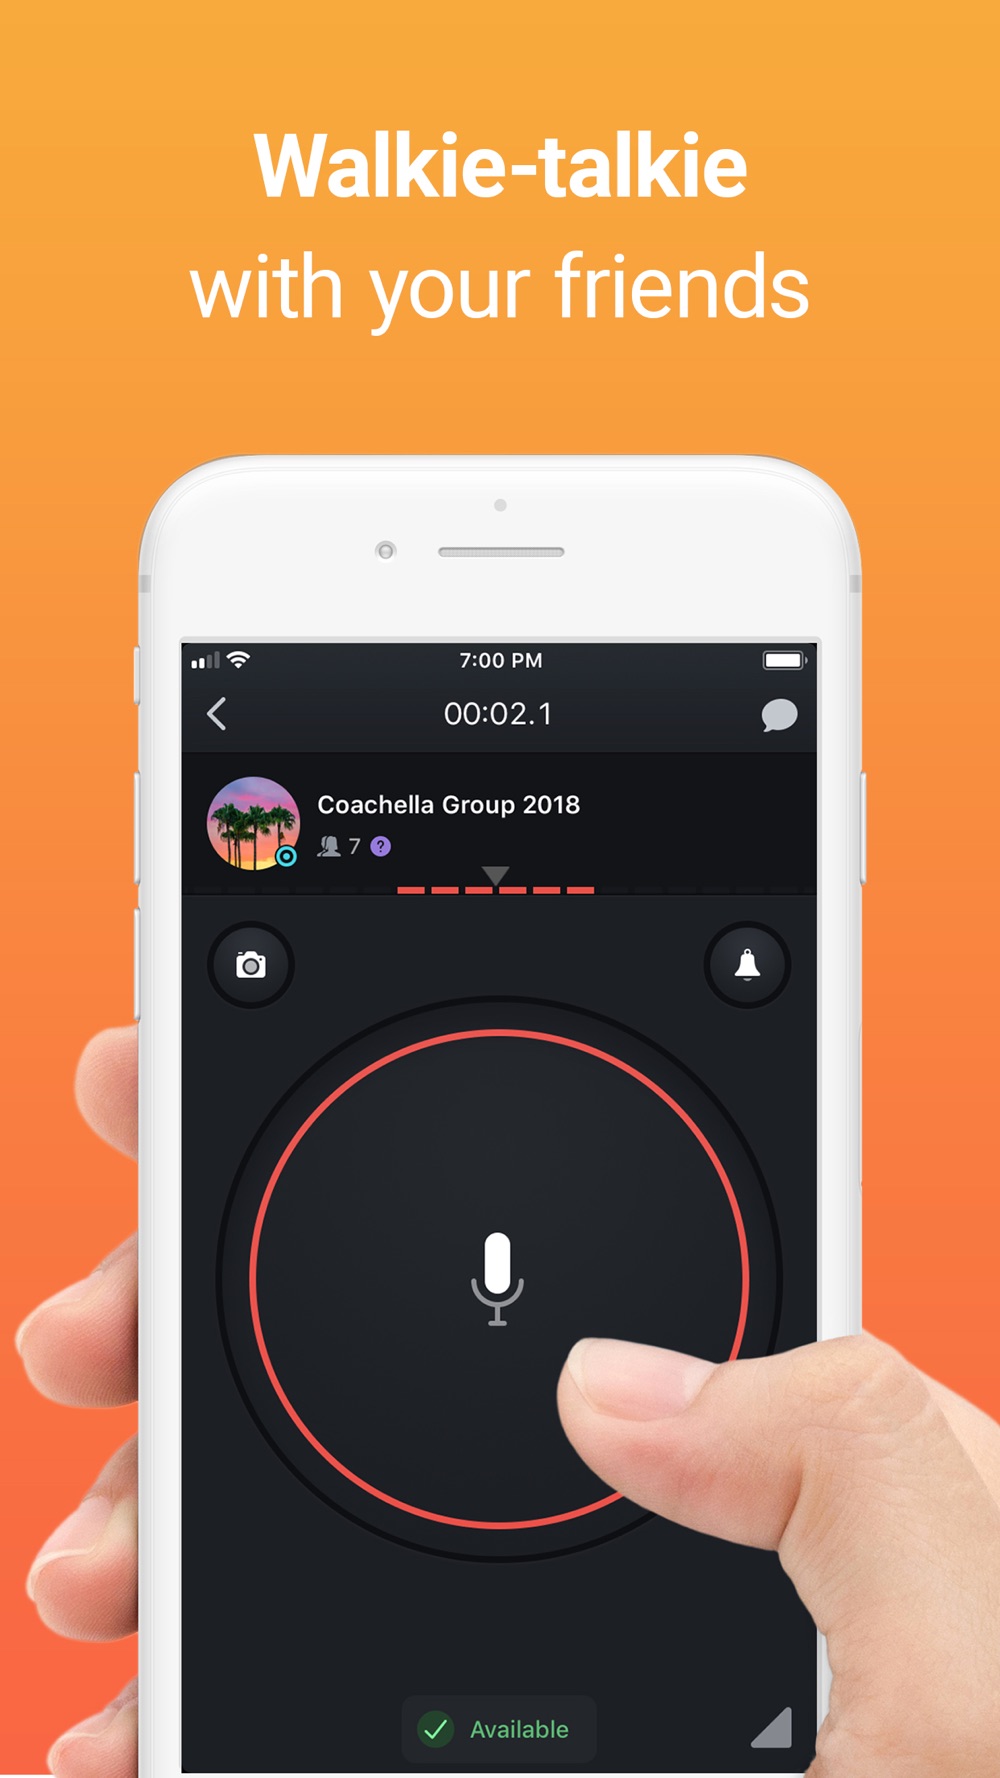 Zello Walkie Talkie Free Download App for iPhone - STEPrimo.com